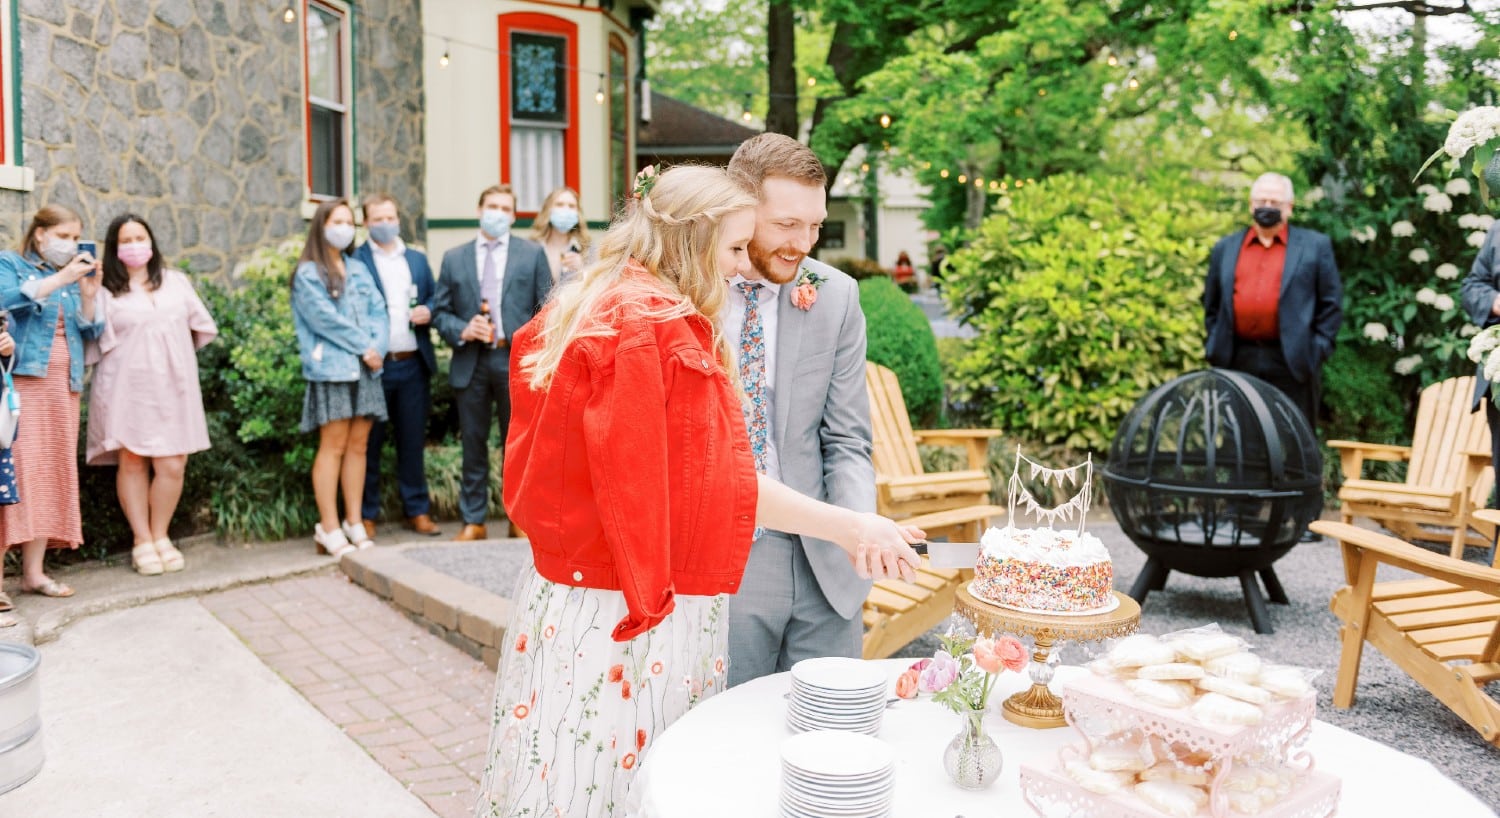 A couple cutting a wedding cake on an outdoor patio with people looking on